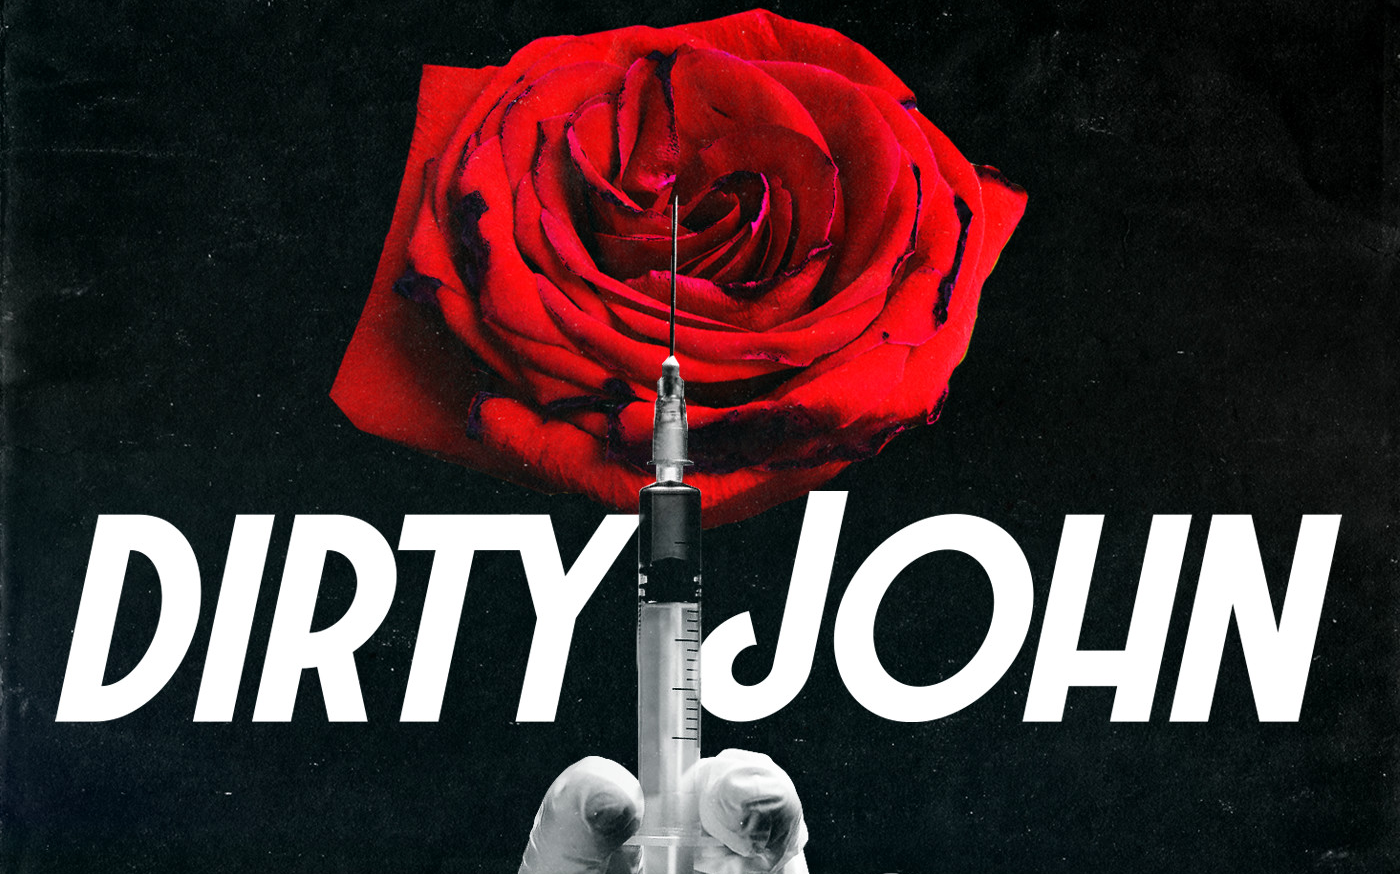 Turns Out The ‘Dirty John’ TV Series Will Reveal Way More Than The Podcast